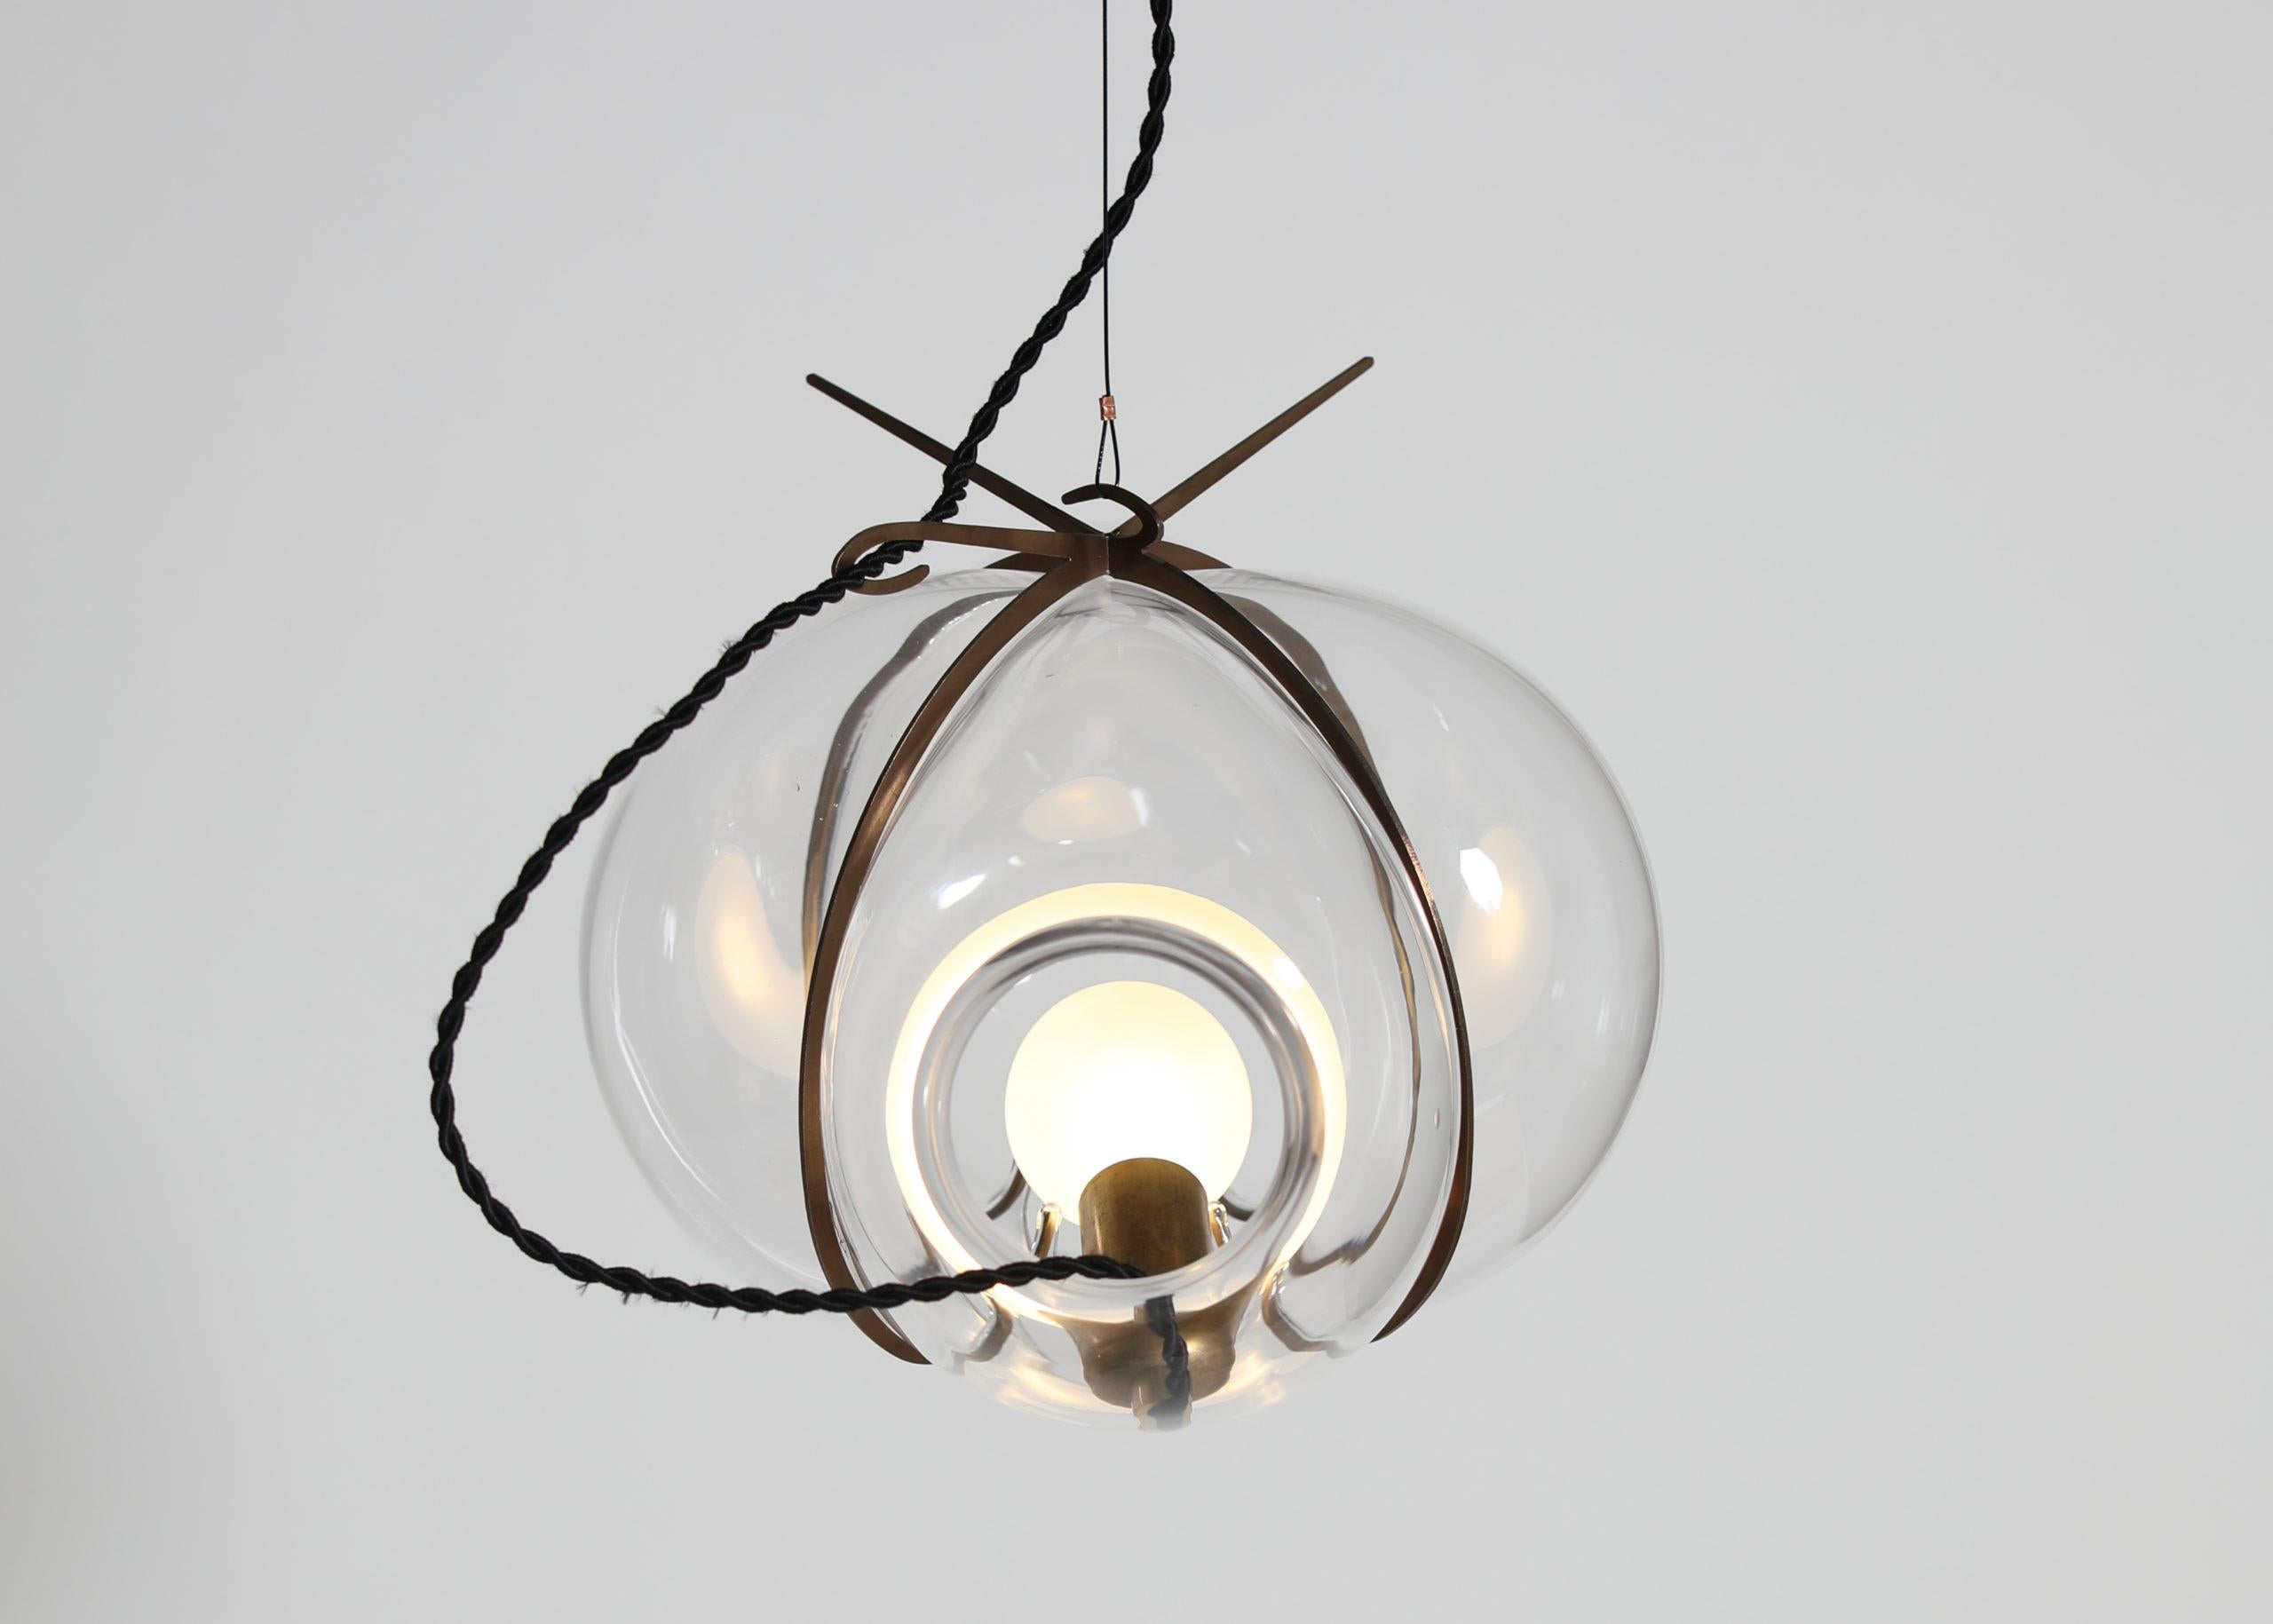 Contemporary glass pendant light - Exhale by Catie Newell / Wes McGee for WDSTCK

Design: Catie Newell / Wes McGee
Material: Crystal glass / stainless steel

Dimensions: Diameter 30 cm

Handcrafted in The Netherlands

Exhale skillfully